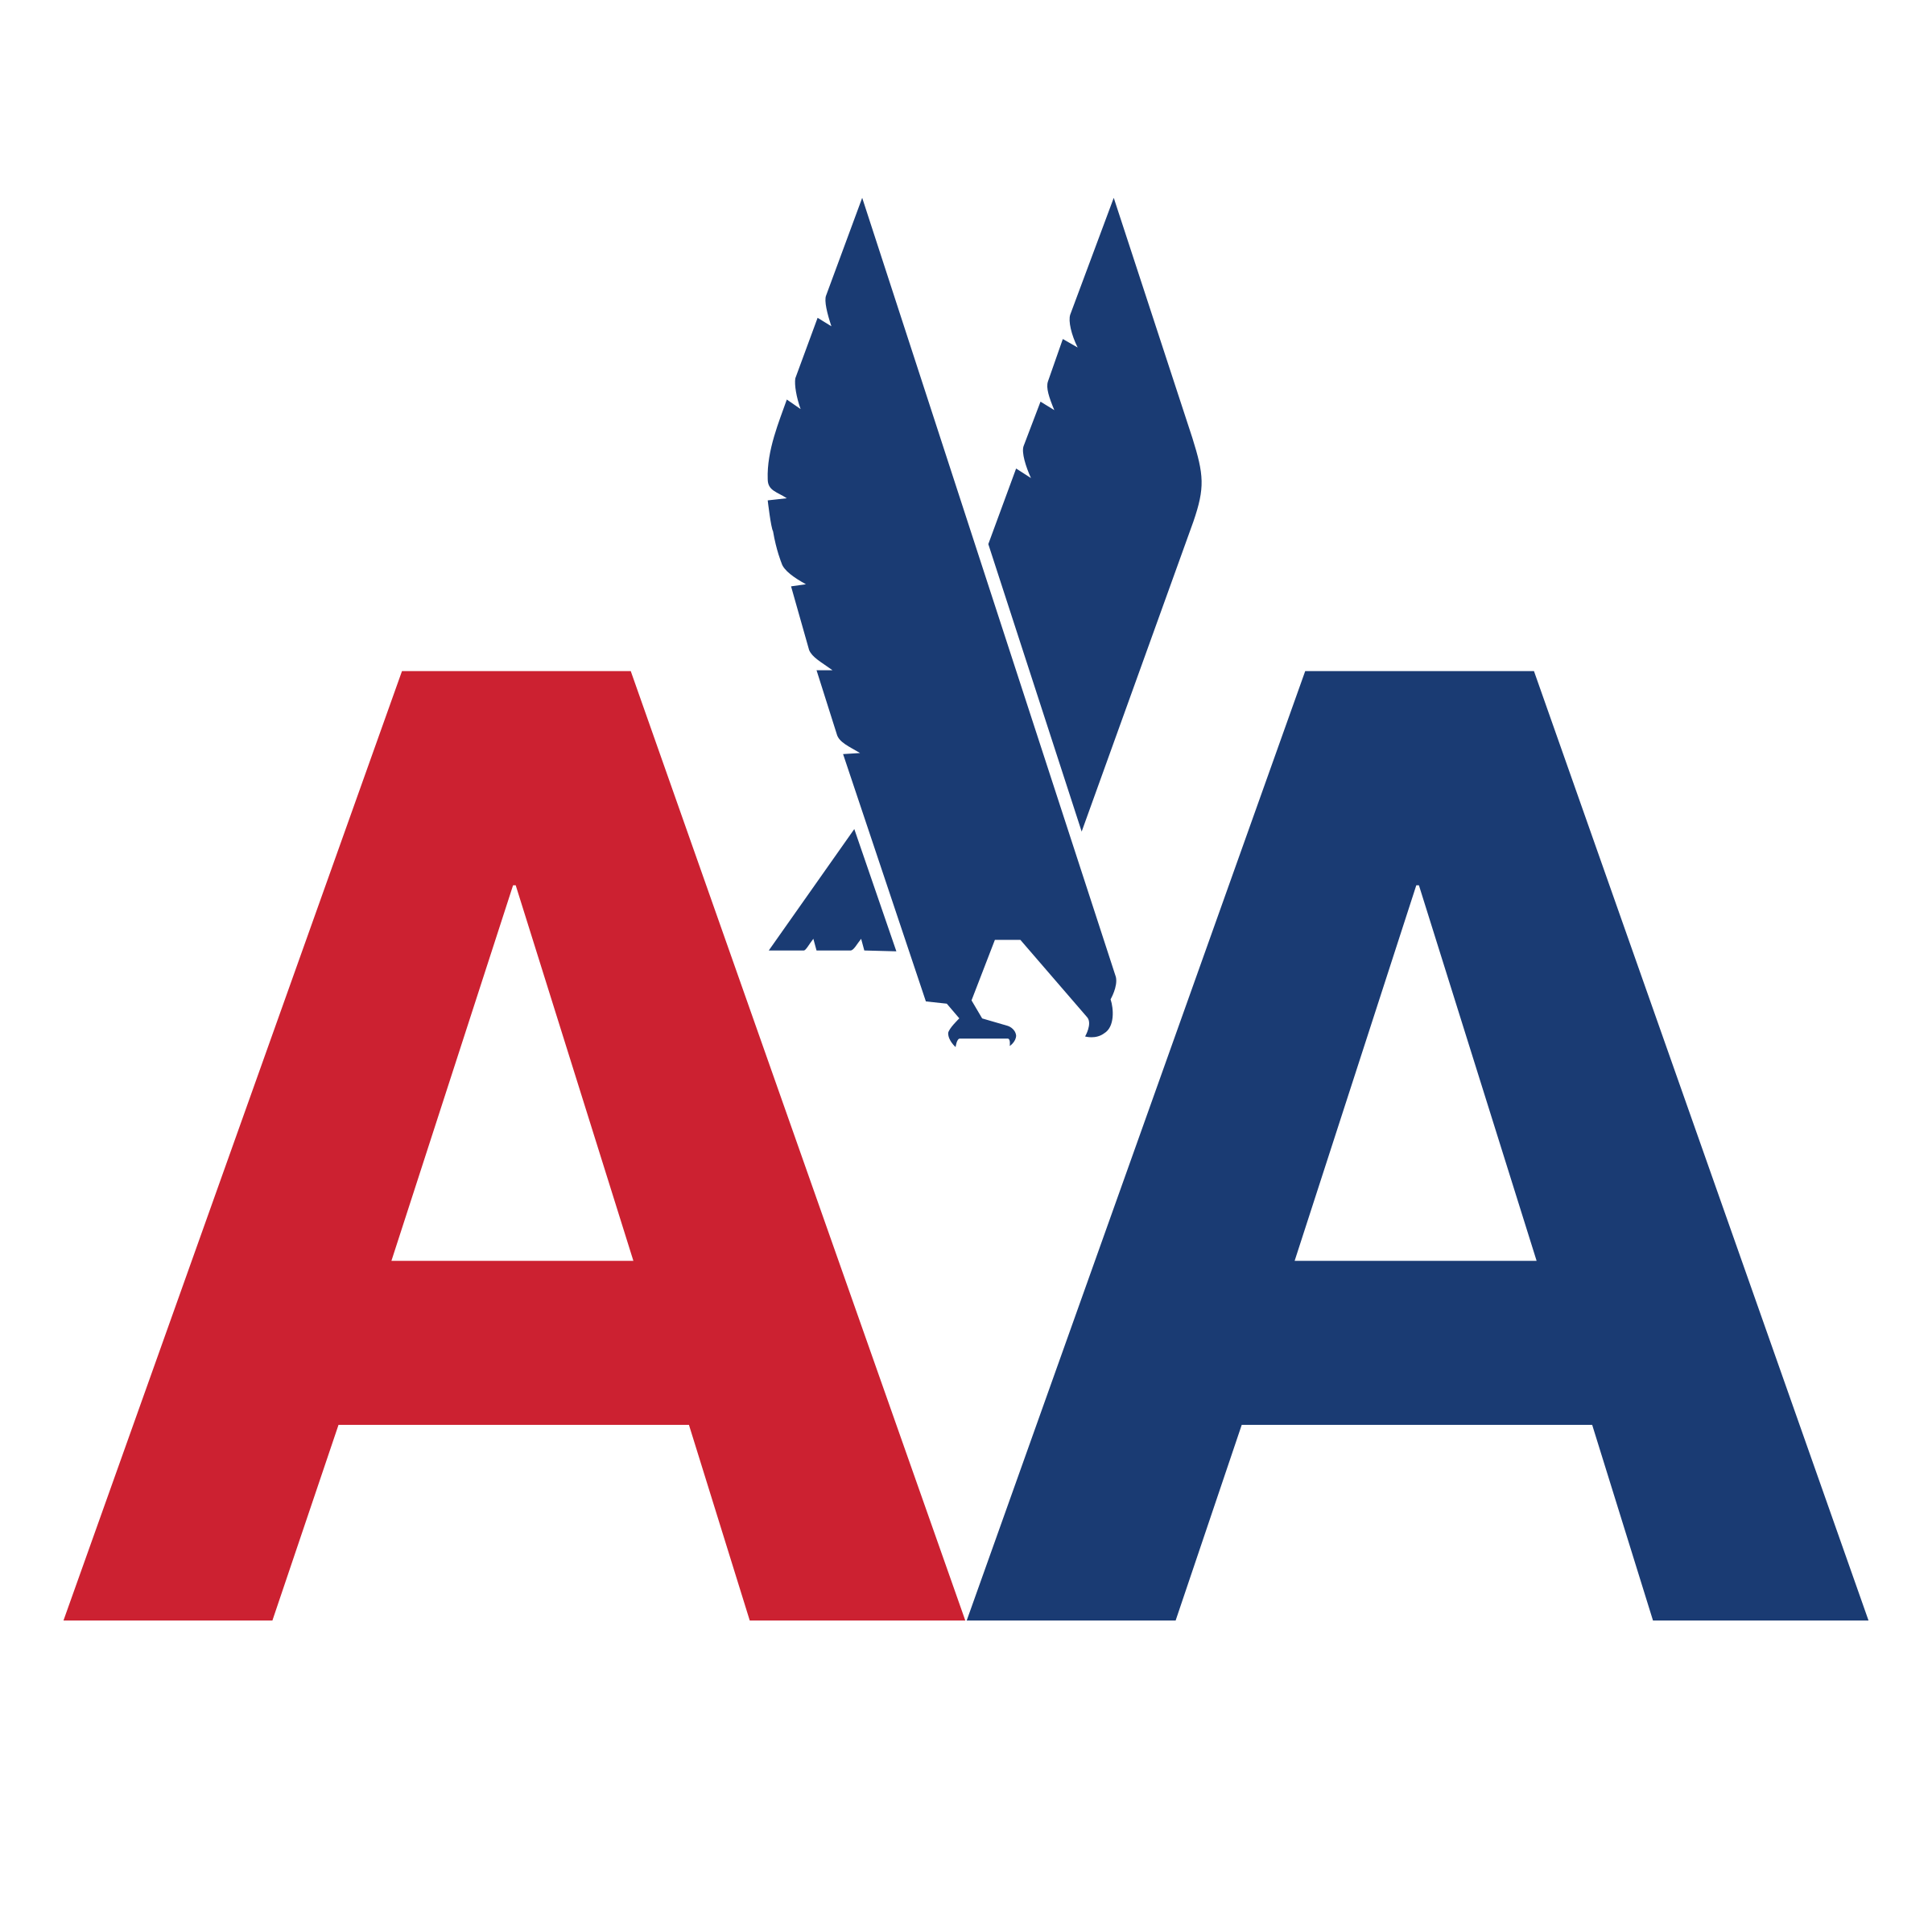 American Airlines Logo PNG File